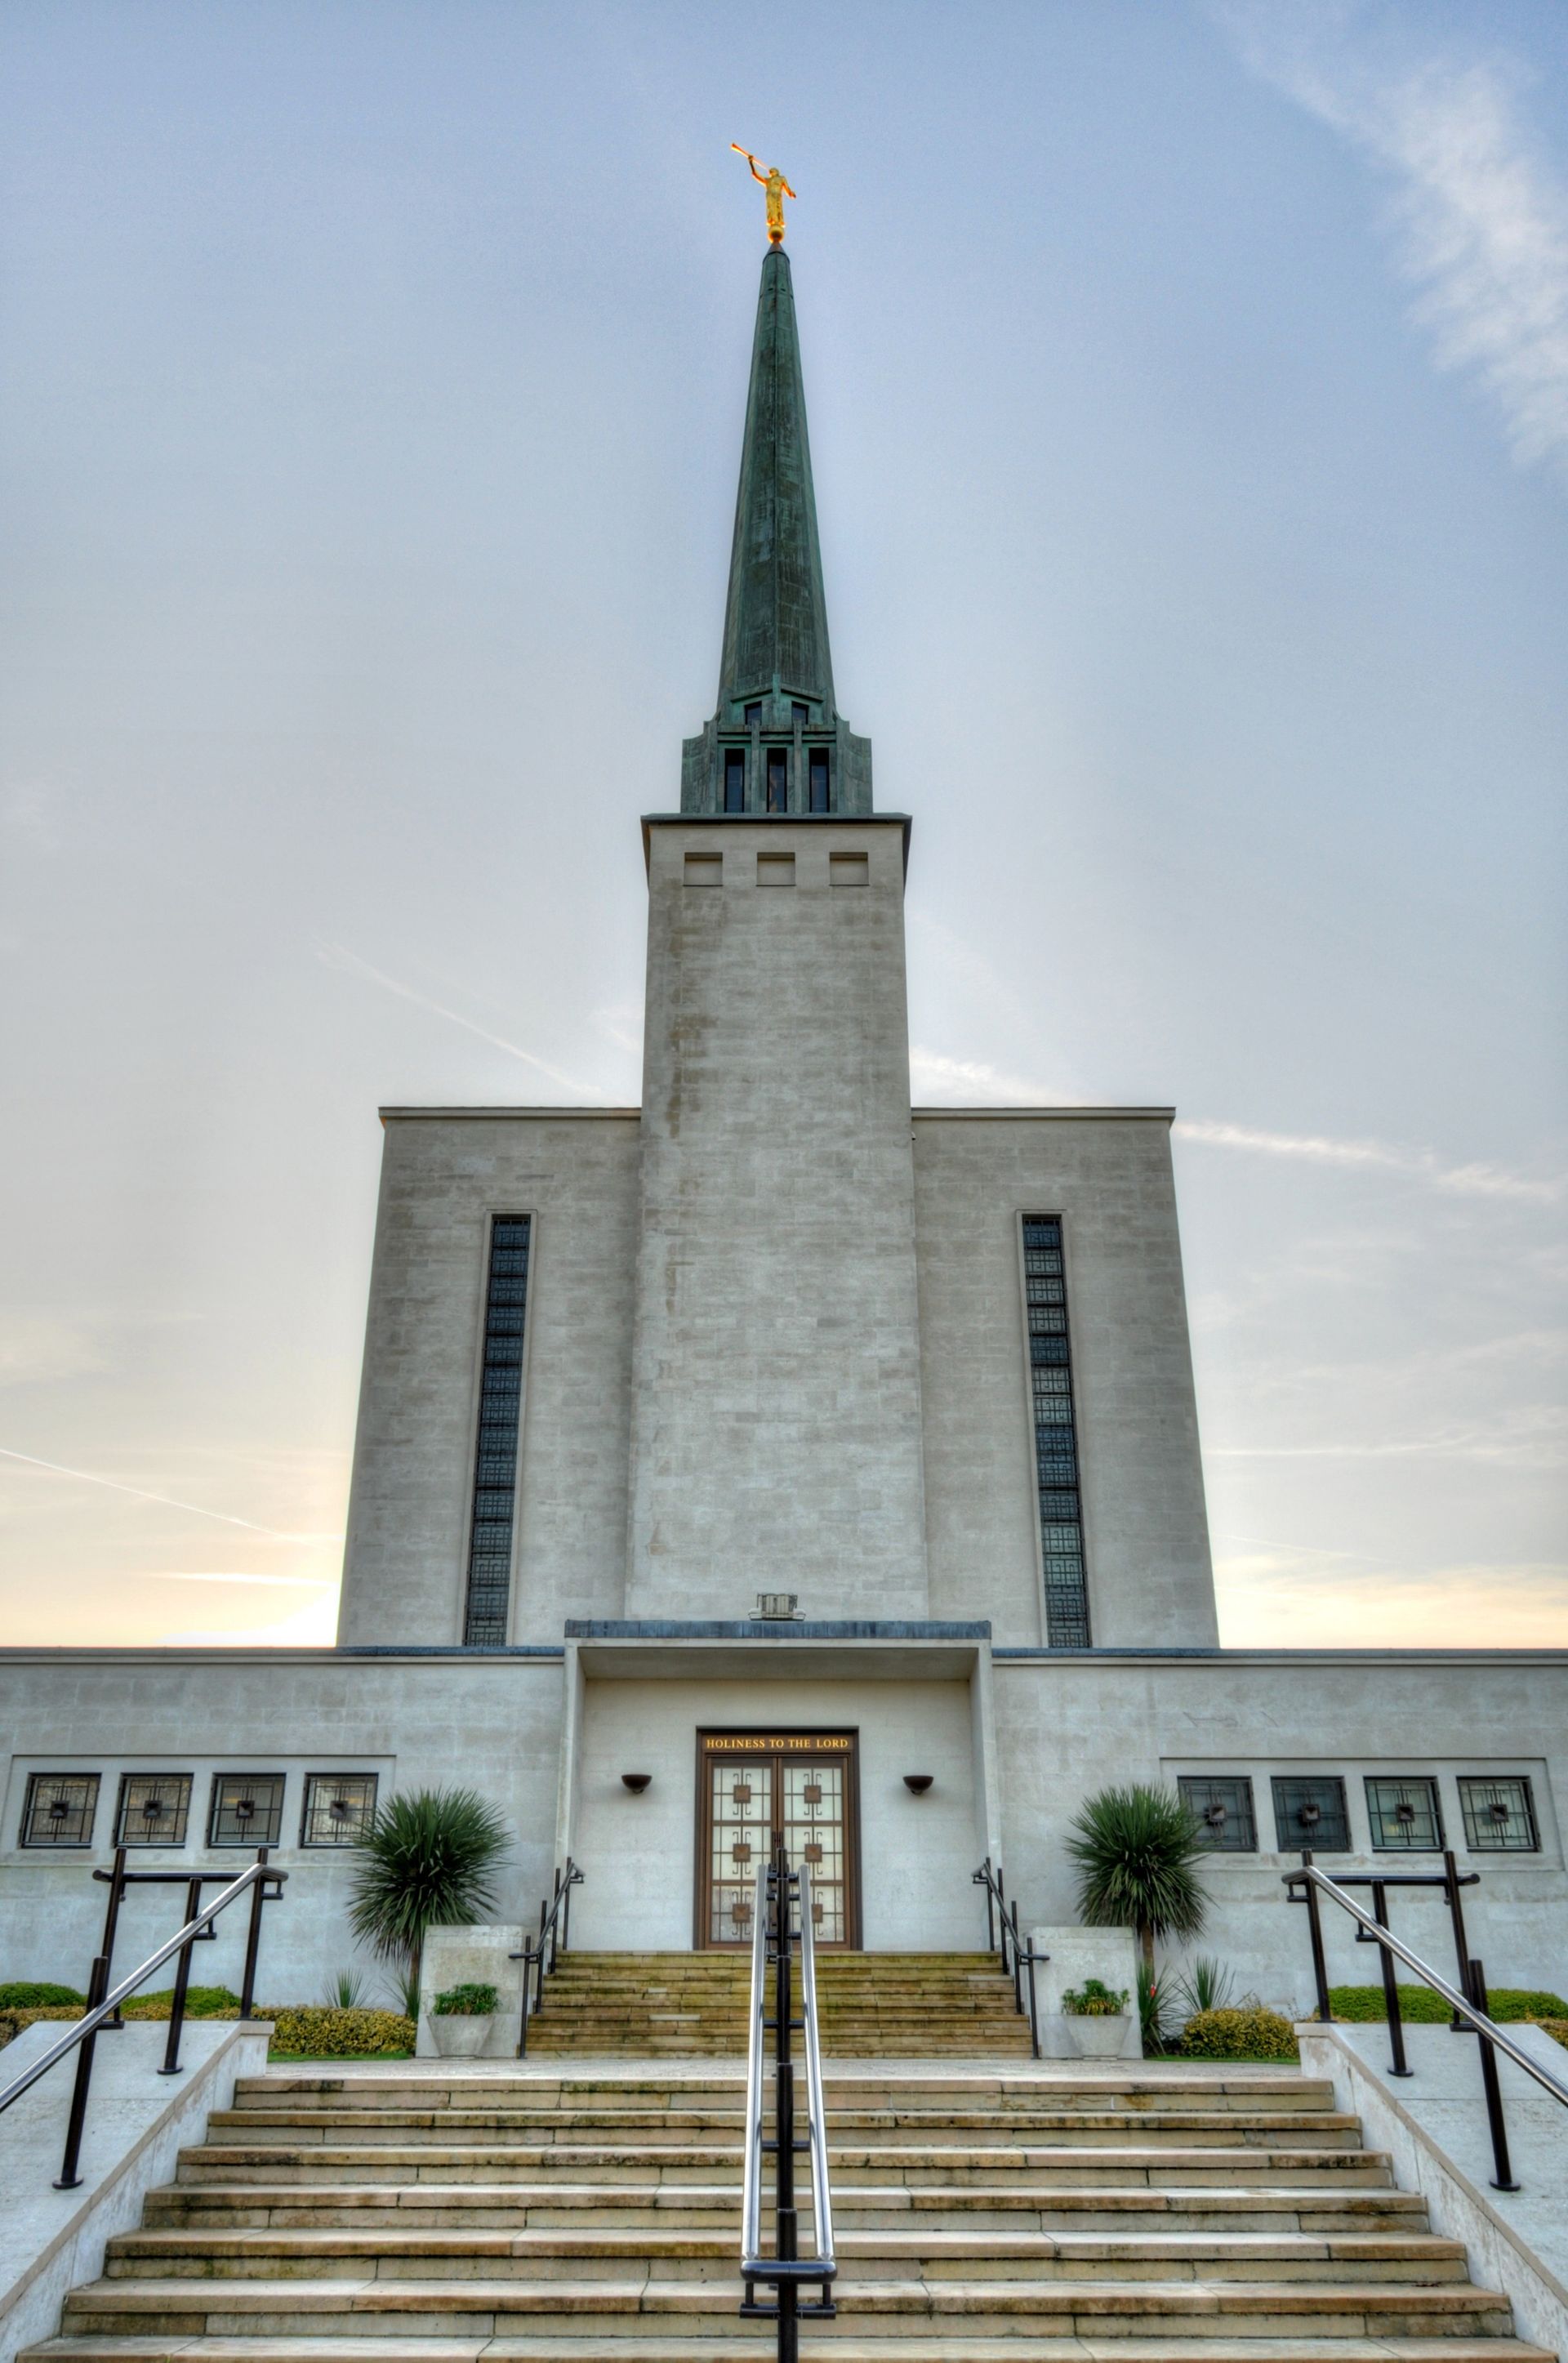 The London England Temple entrance, including the exterior of the temple.